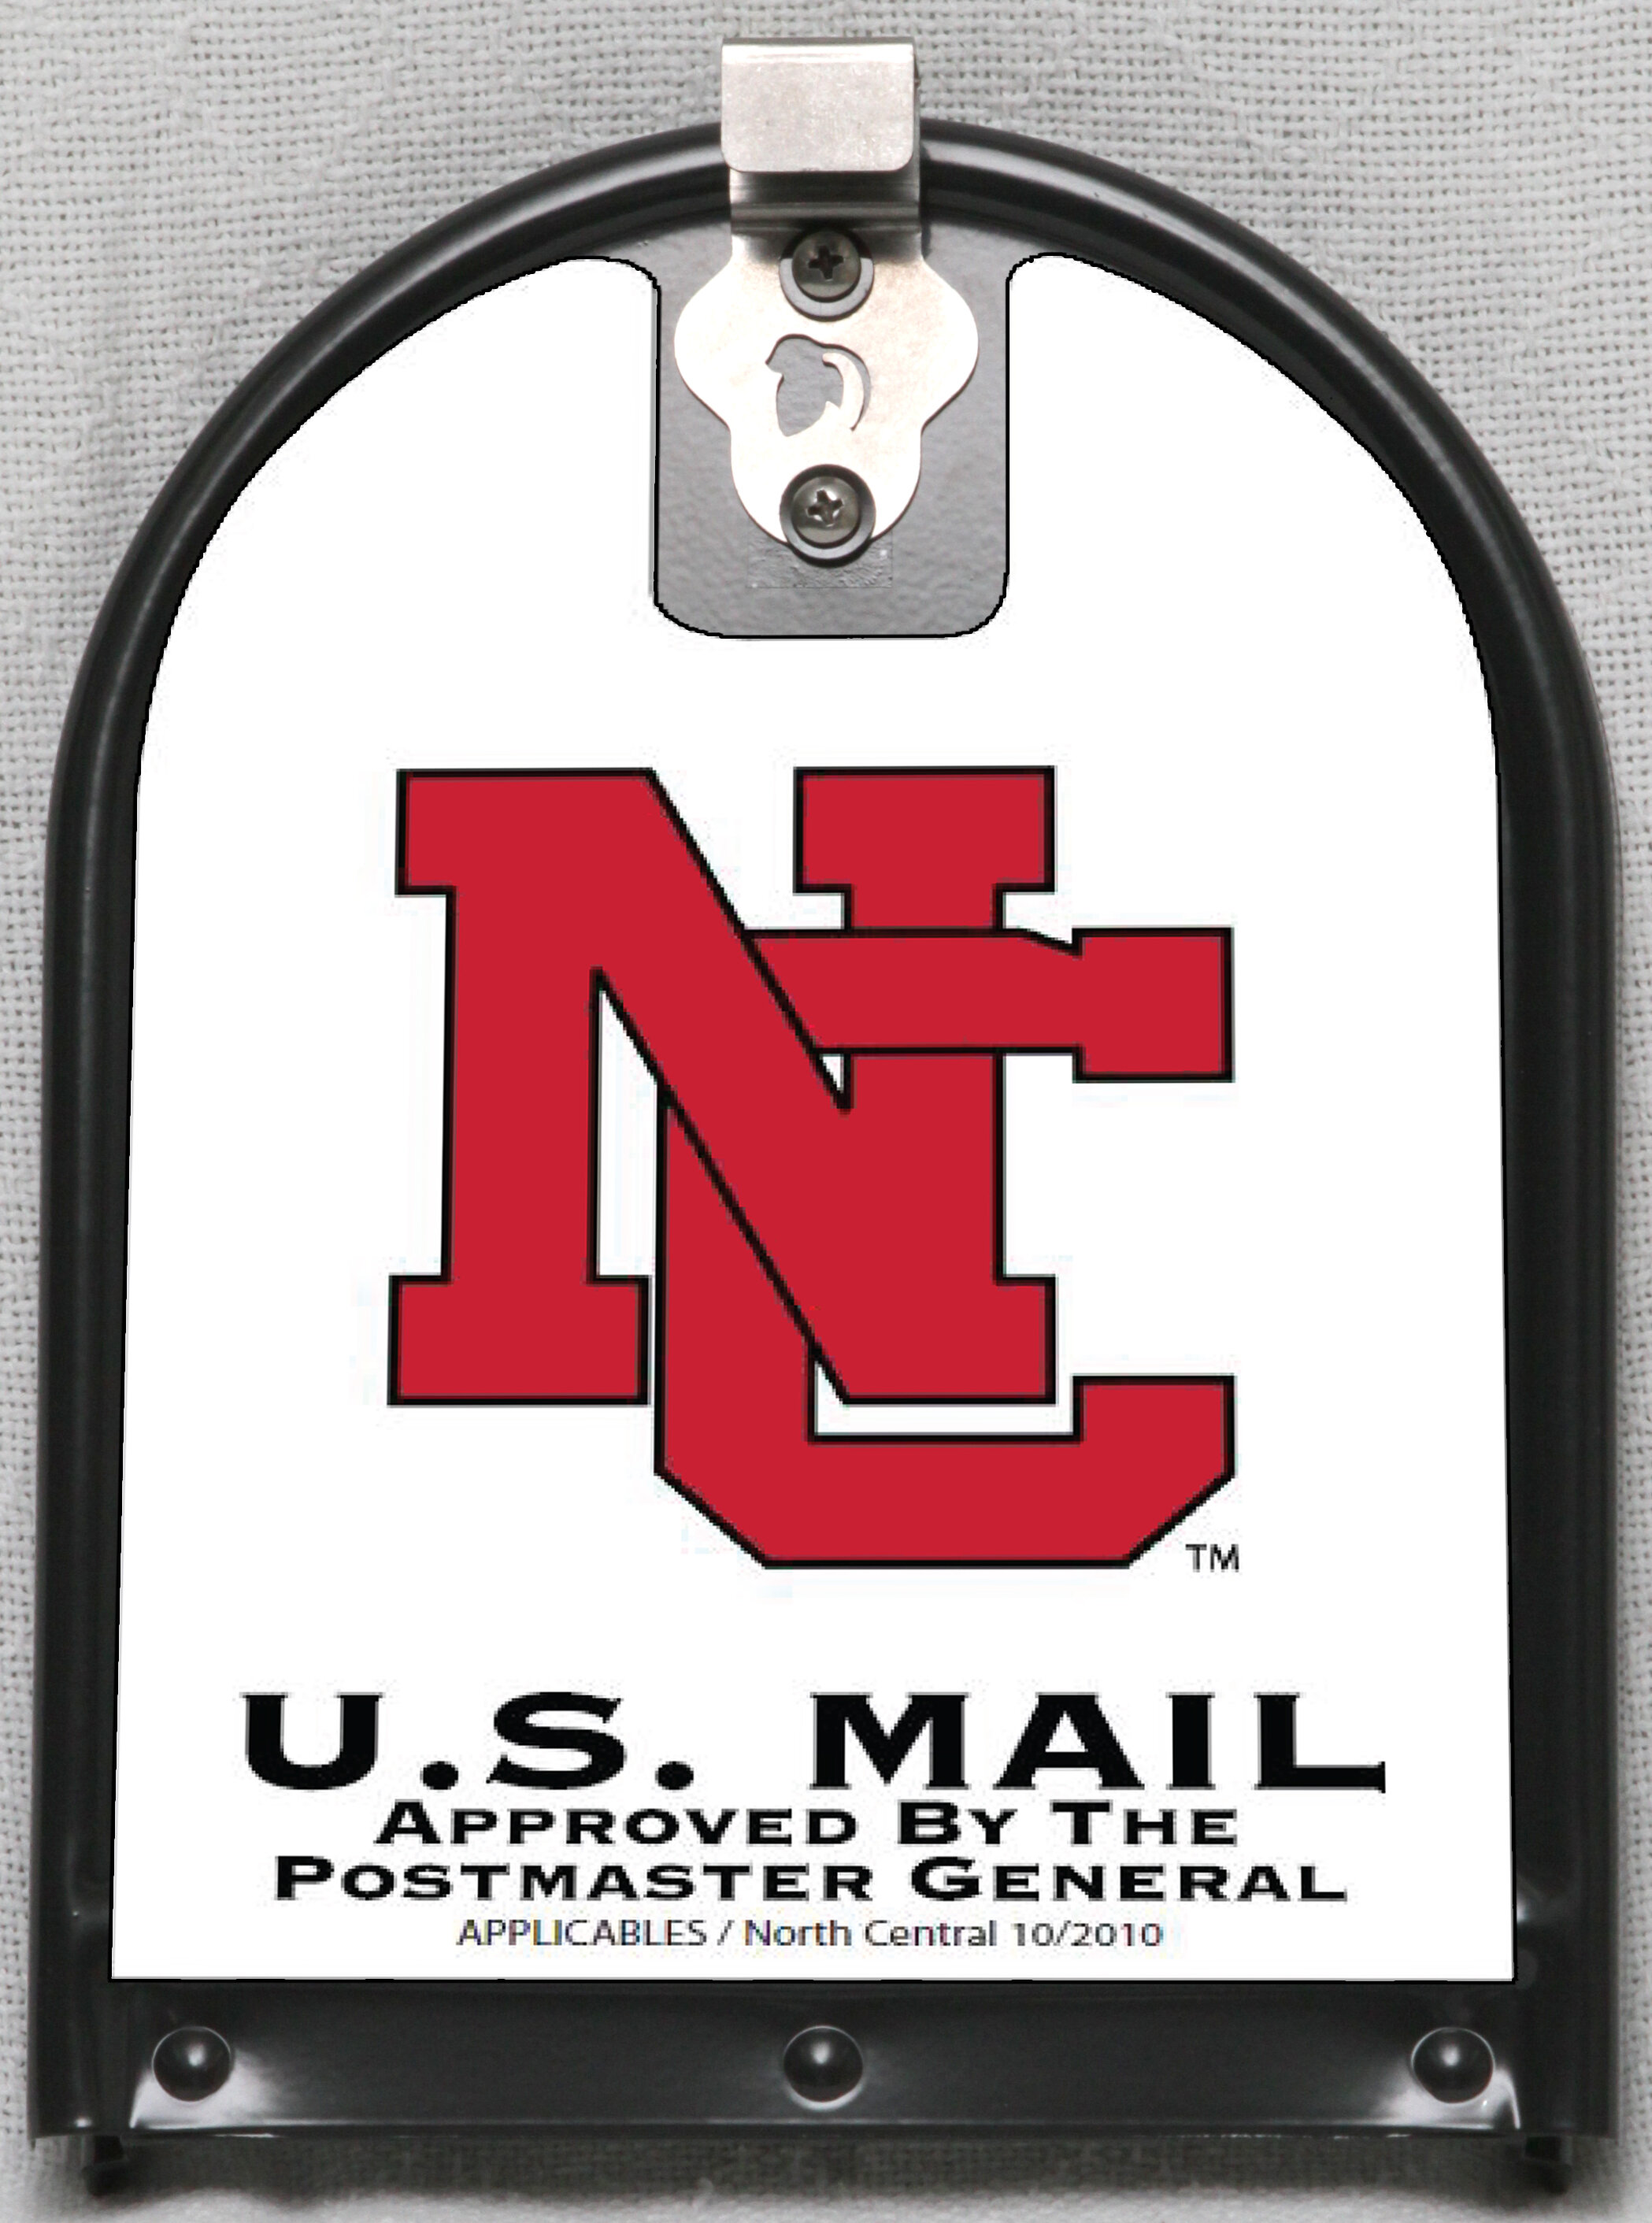 Purdue University Magnetic Mailbox Door Cover applicables 